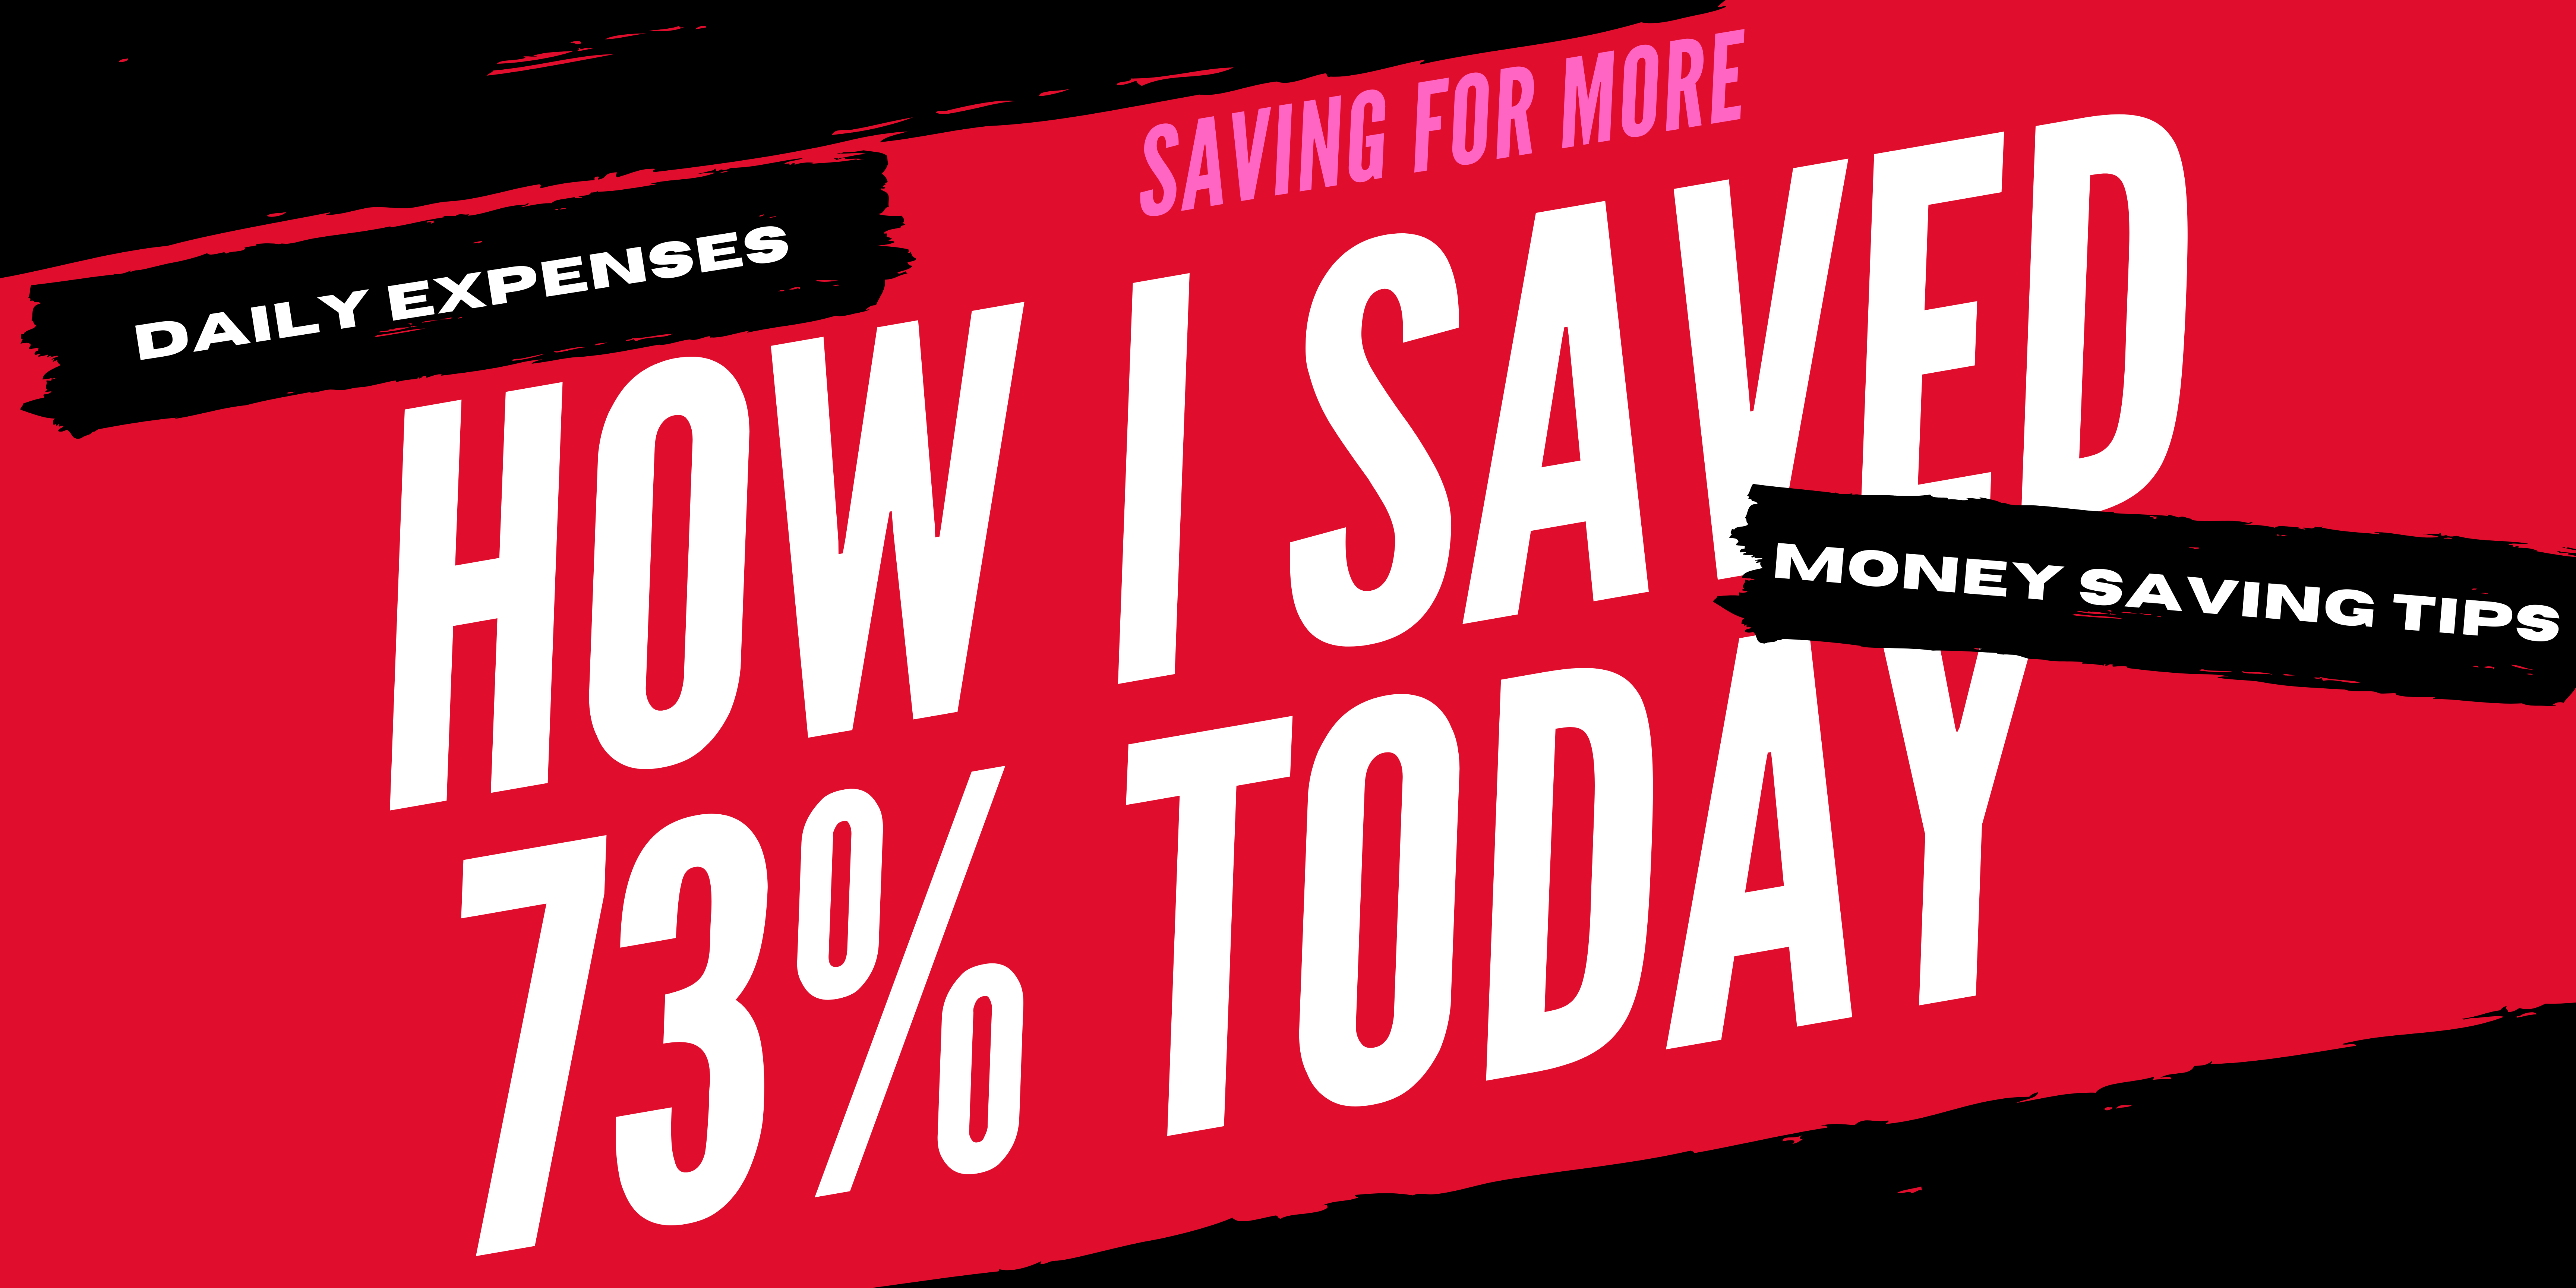 How I Saved 73% Today With Saving For More Deals